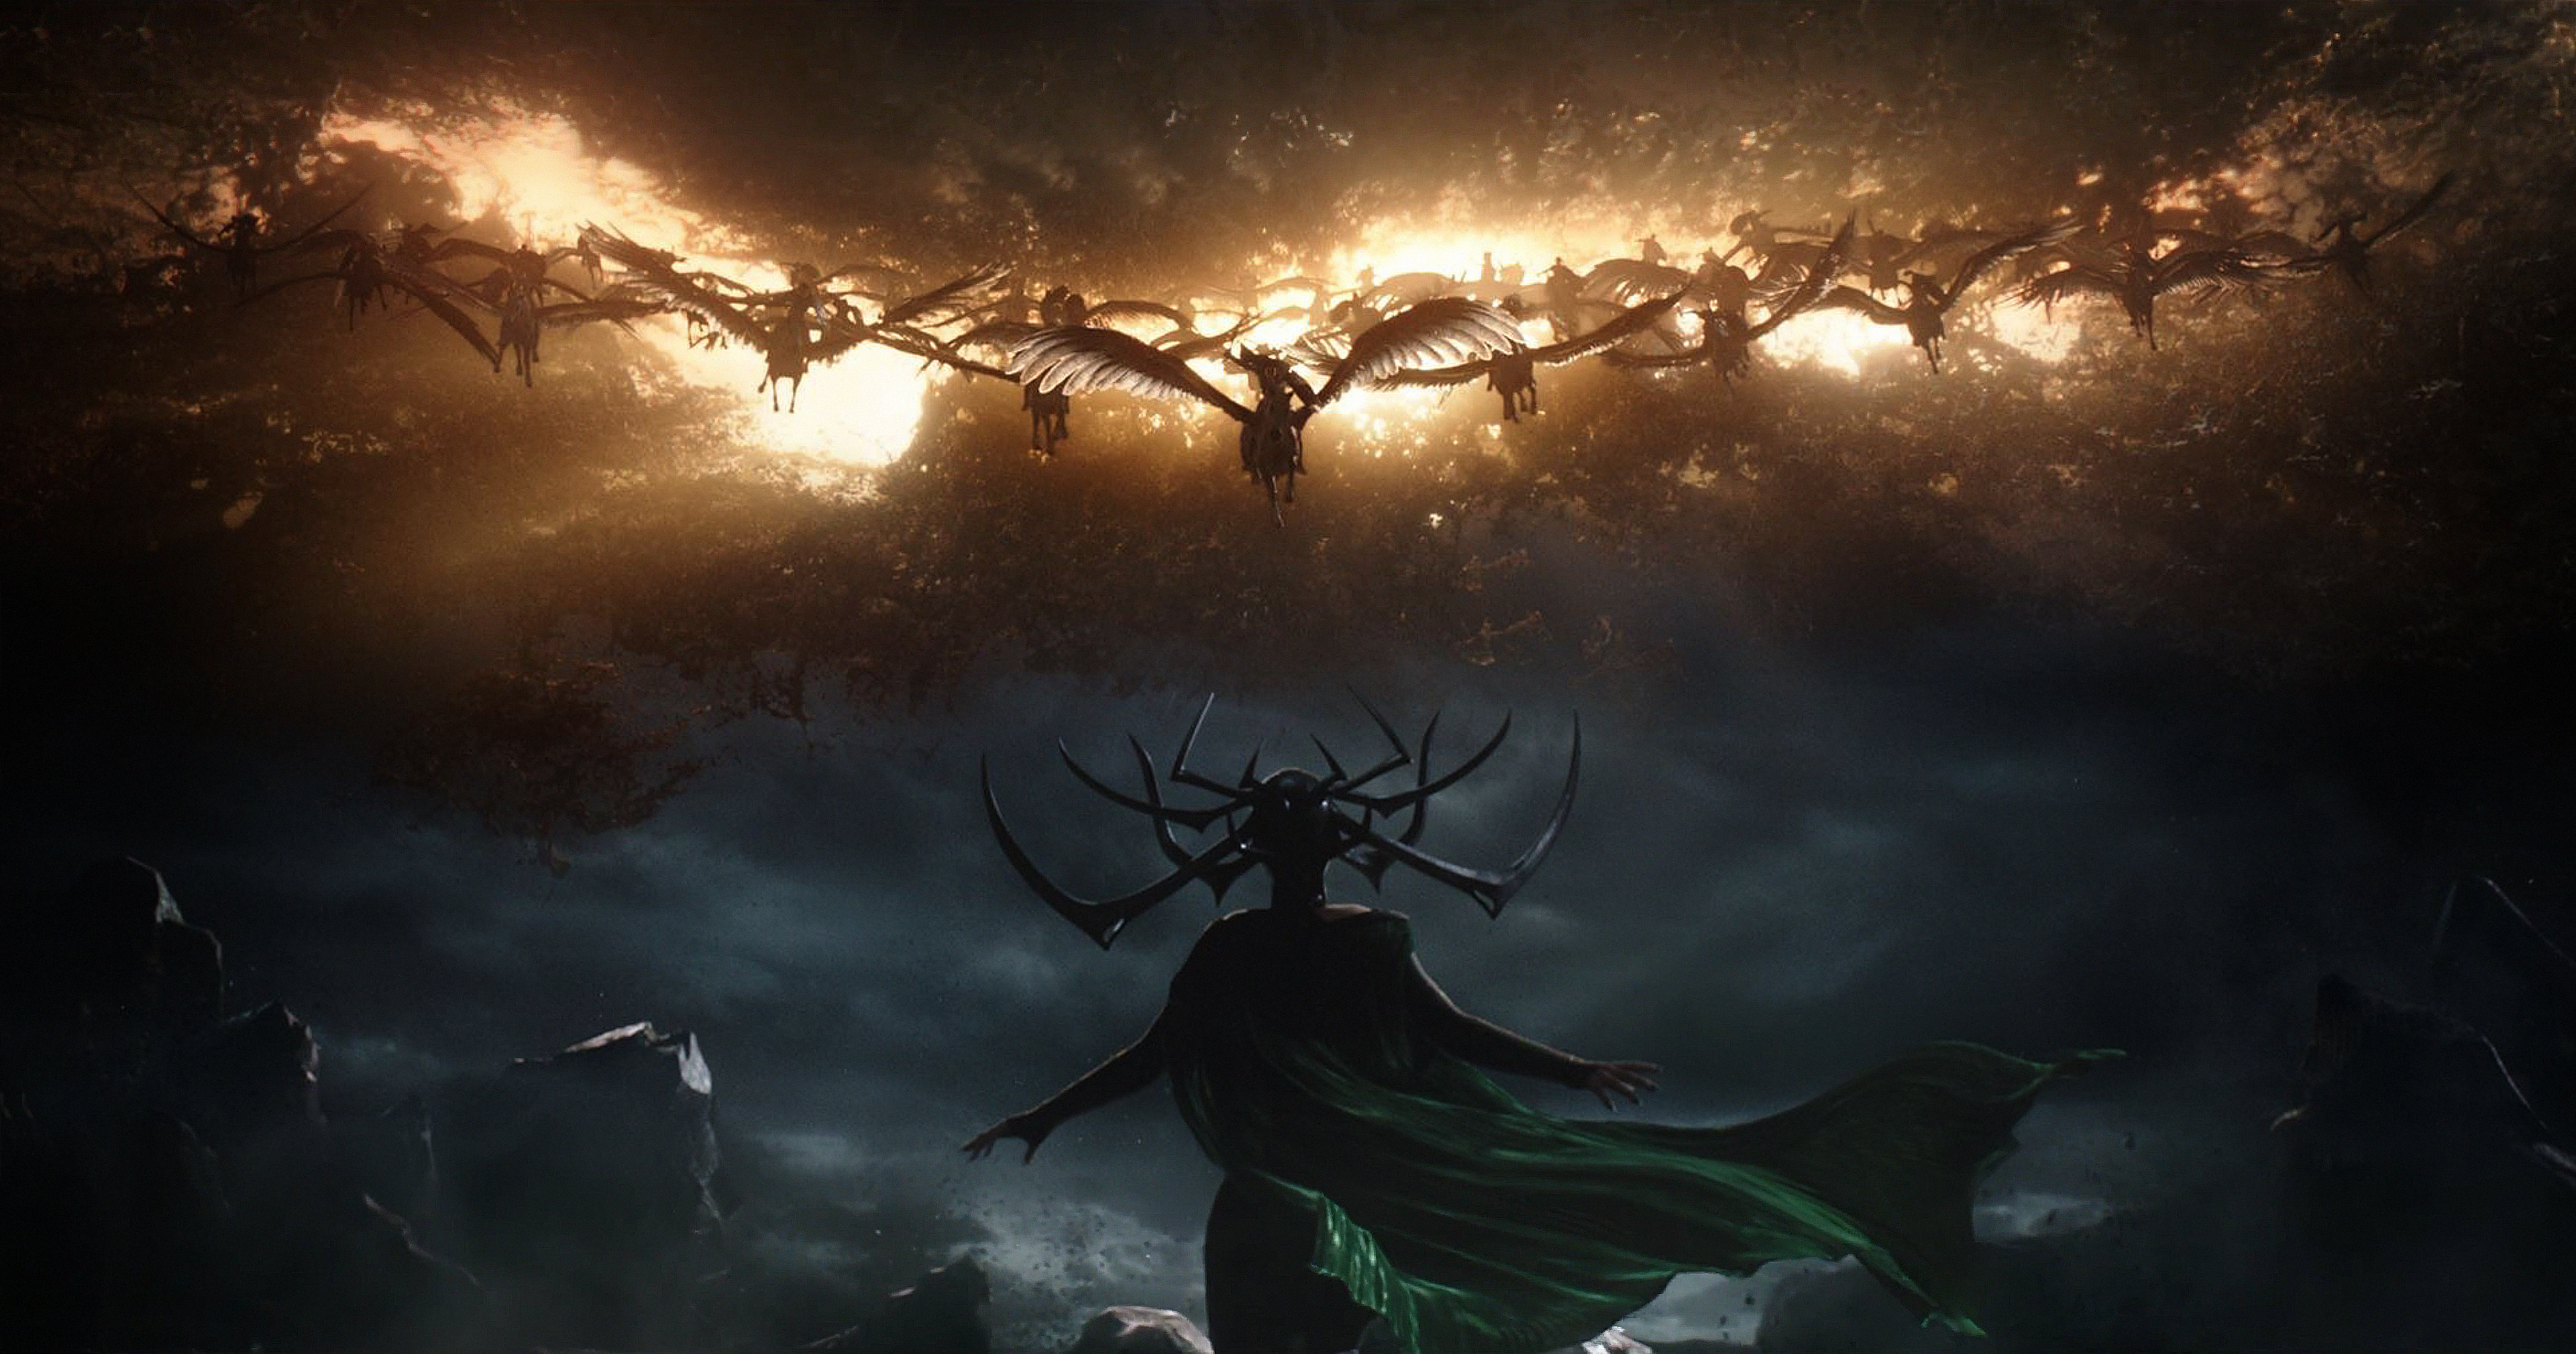 Another Imax Wallpaper From The Valkyrie Flashback Scene In Thor